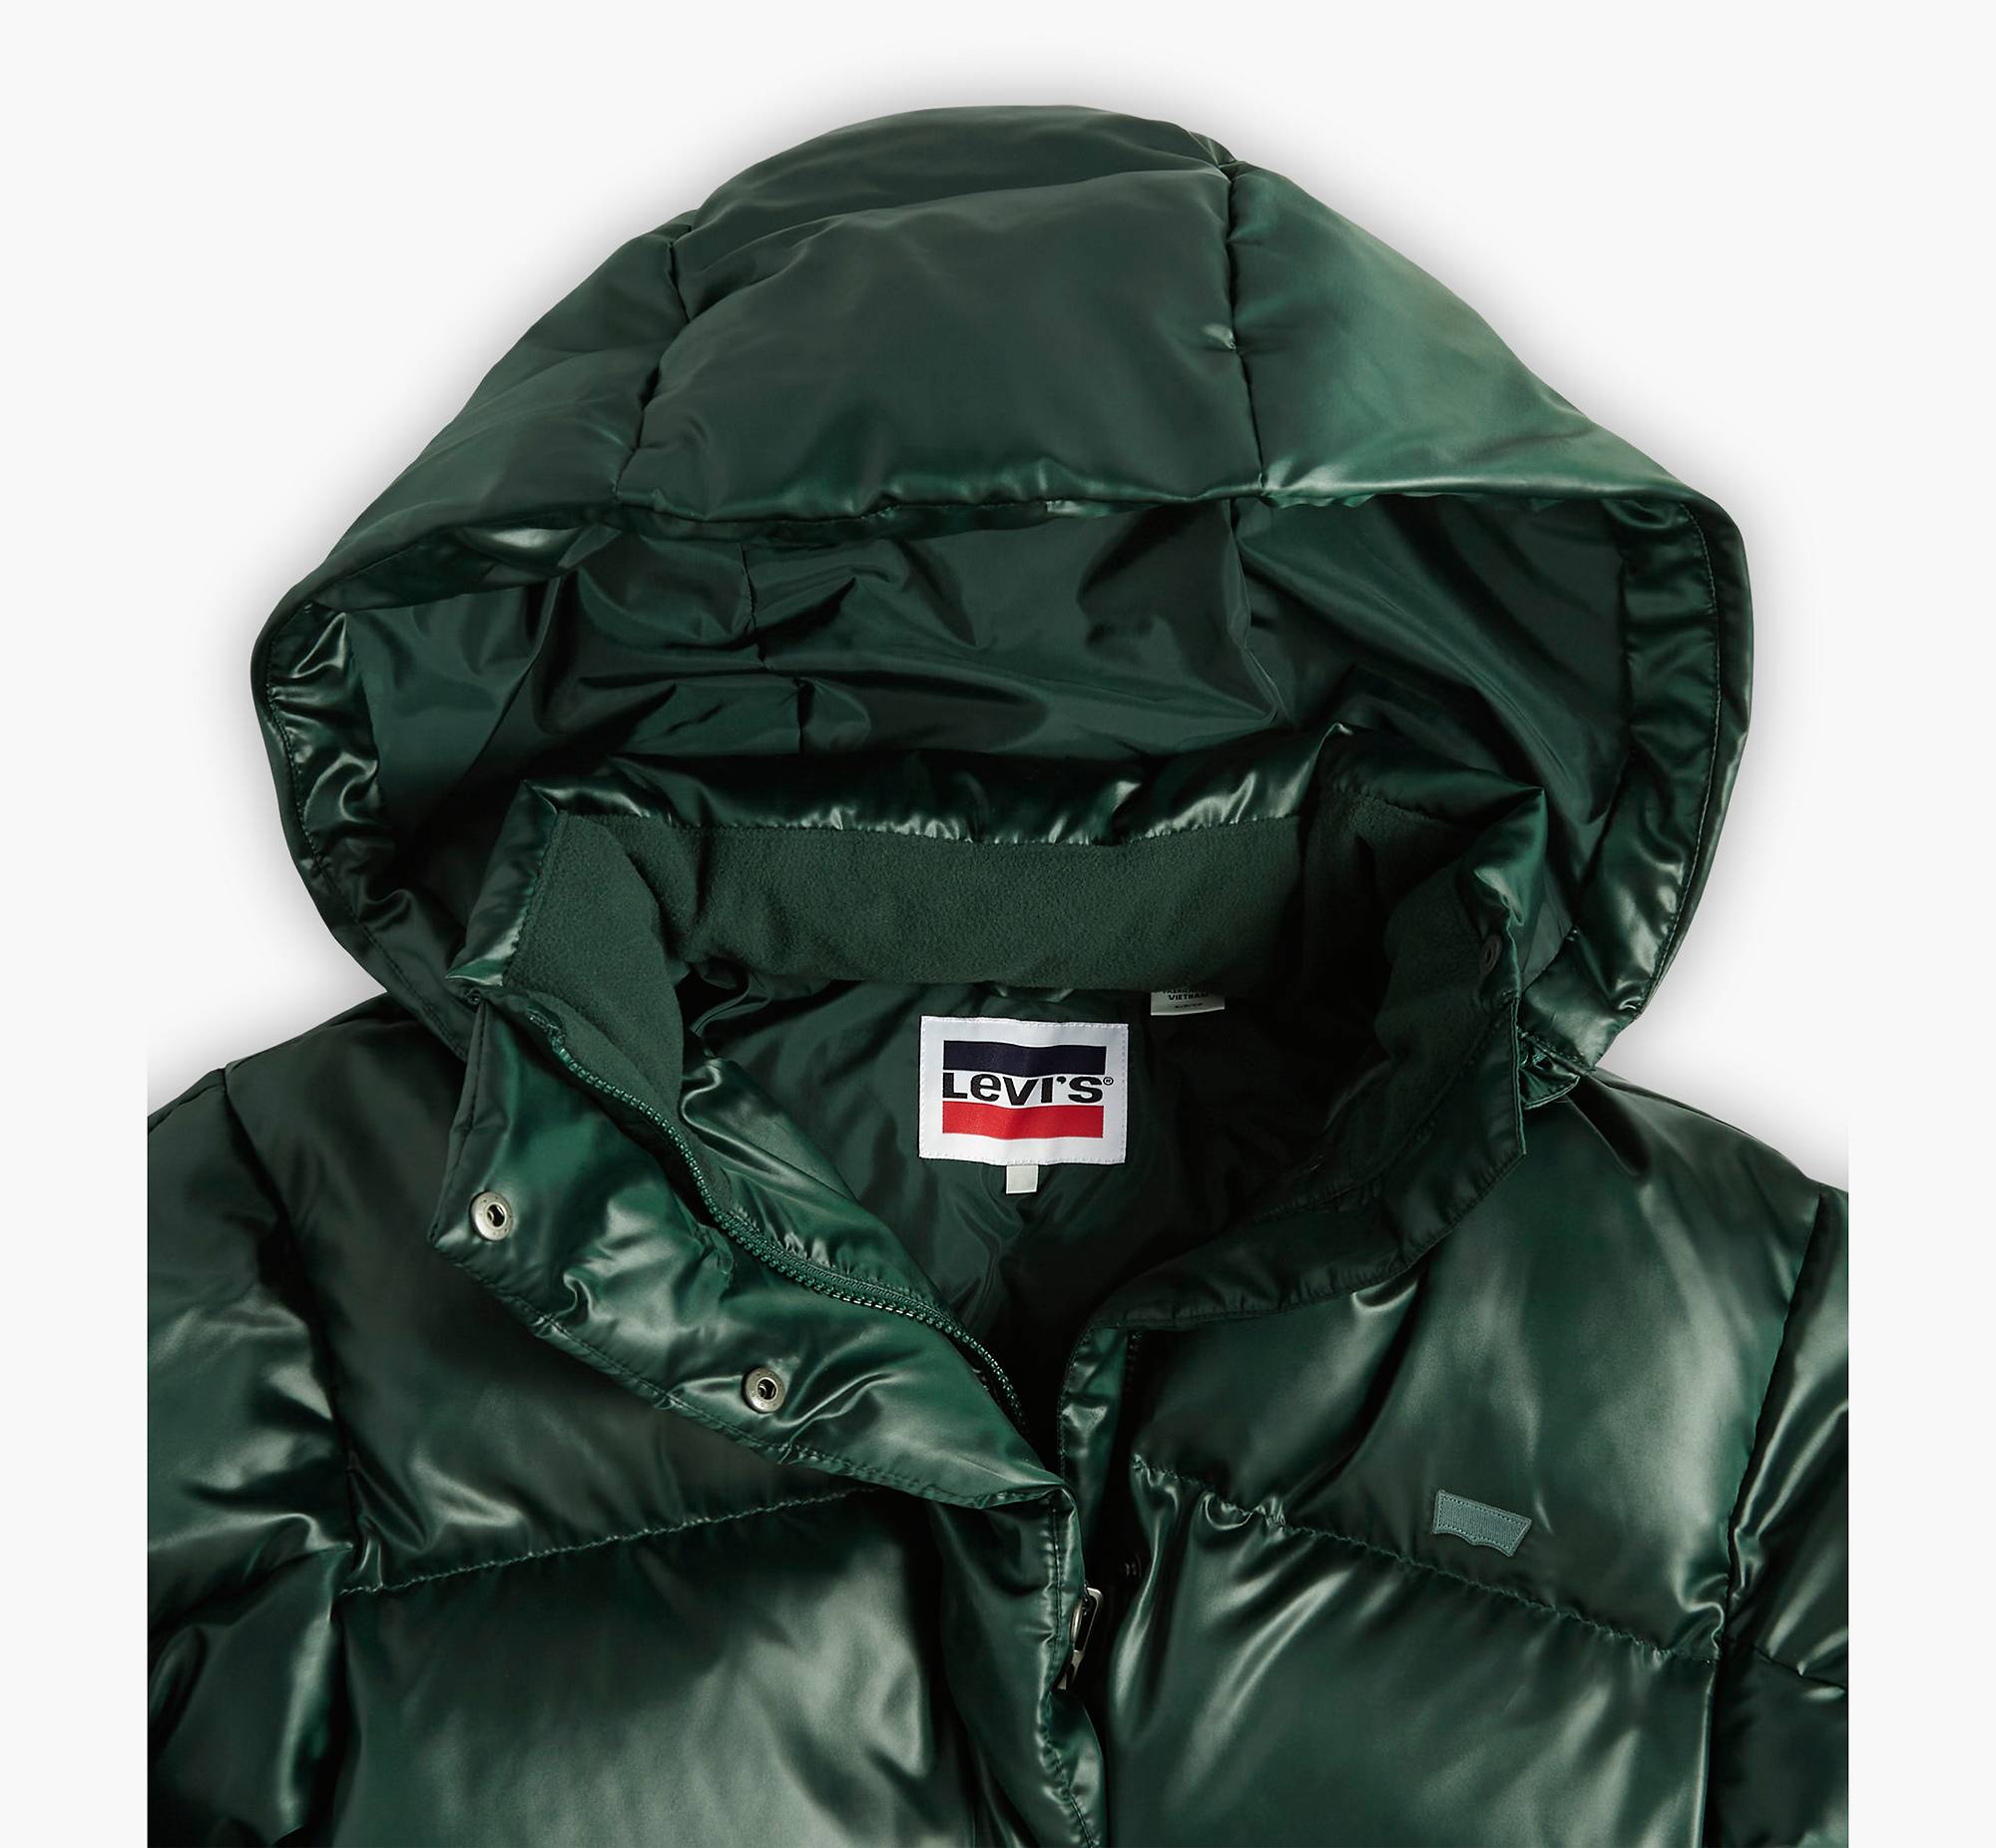 Pillow Bubble Mid Puffer 7